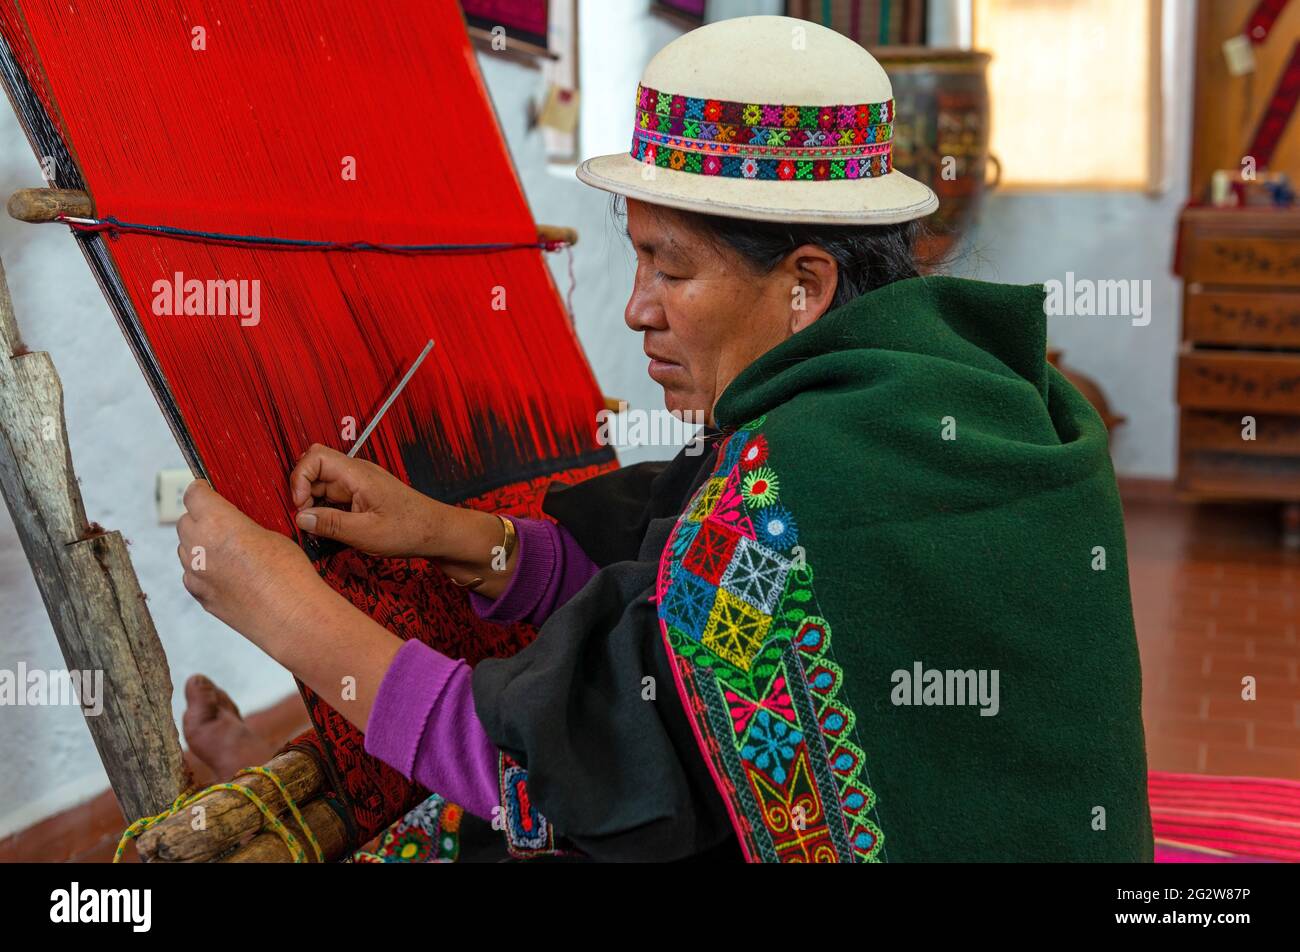 Bolivian senior indigenous woman portrait in traditional clothing showing traditional Jalq'a textile weaving, Sucre, Bolivia. Stock Photo